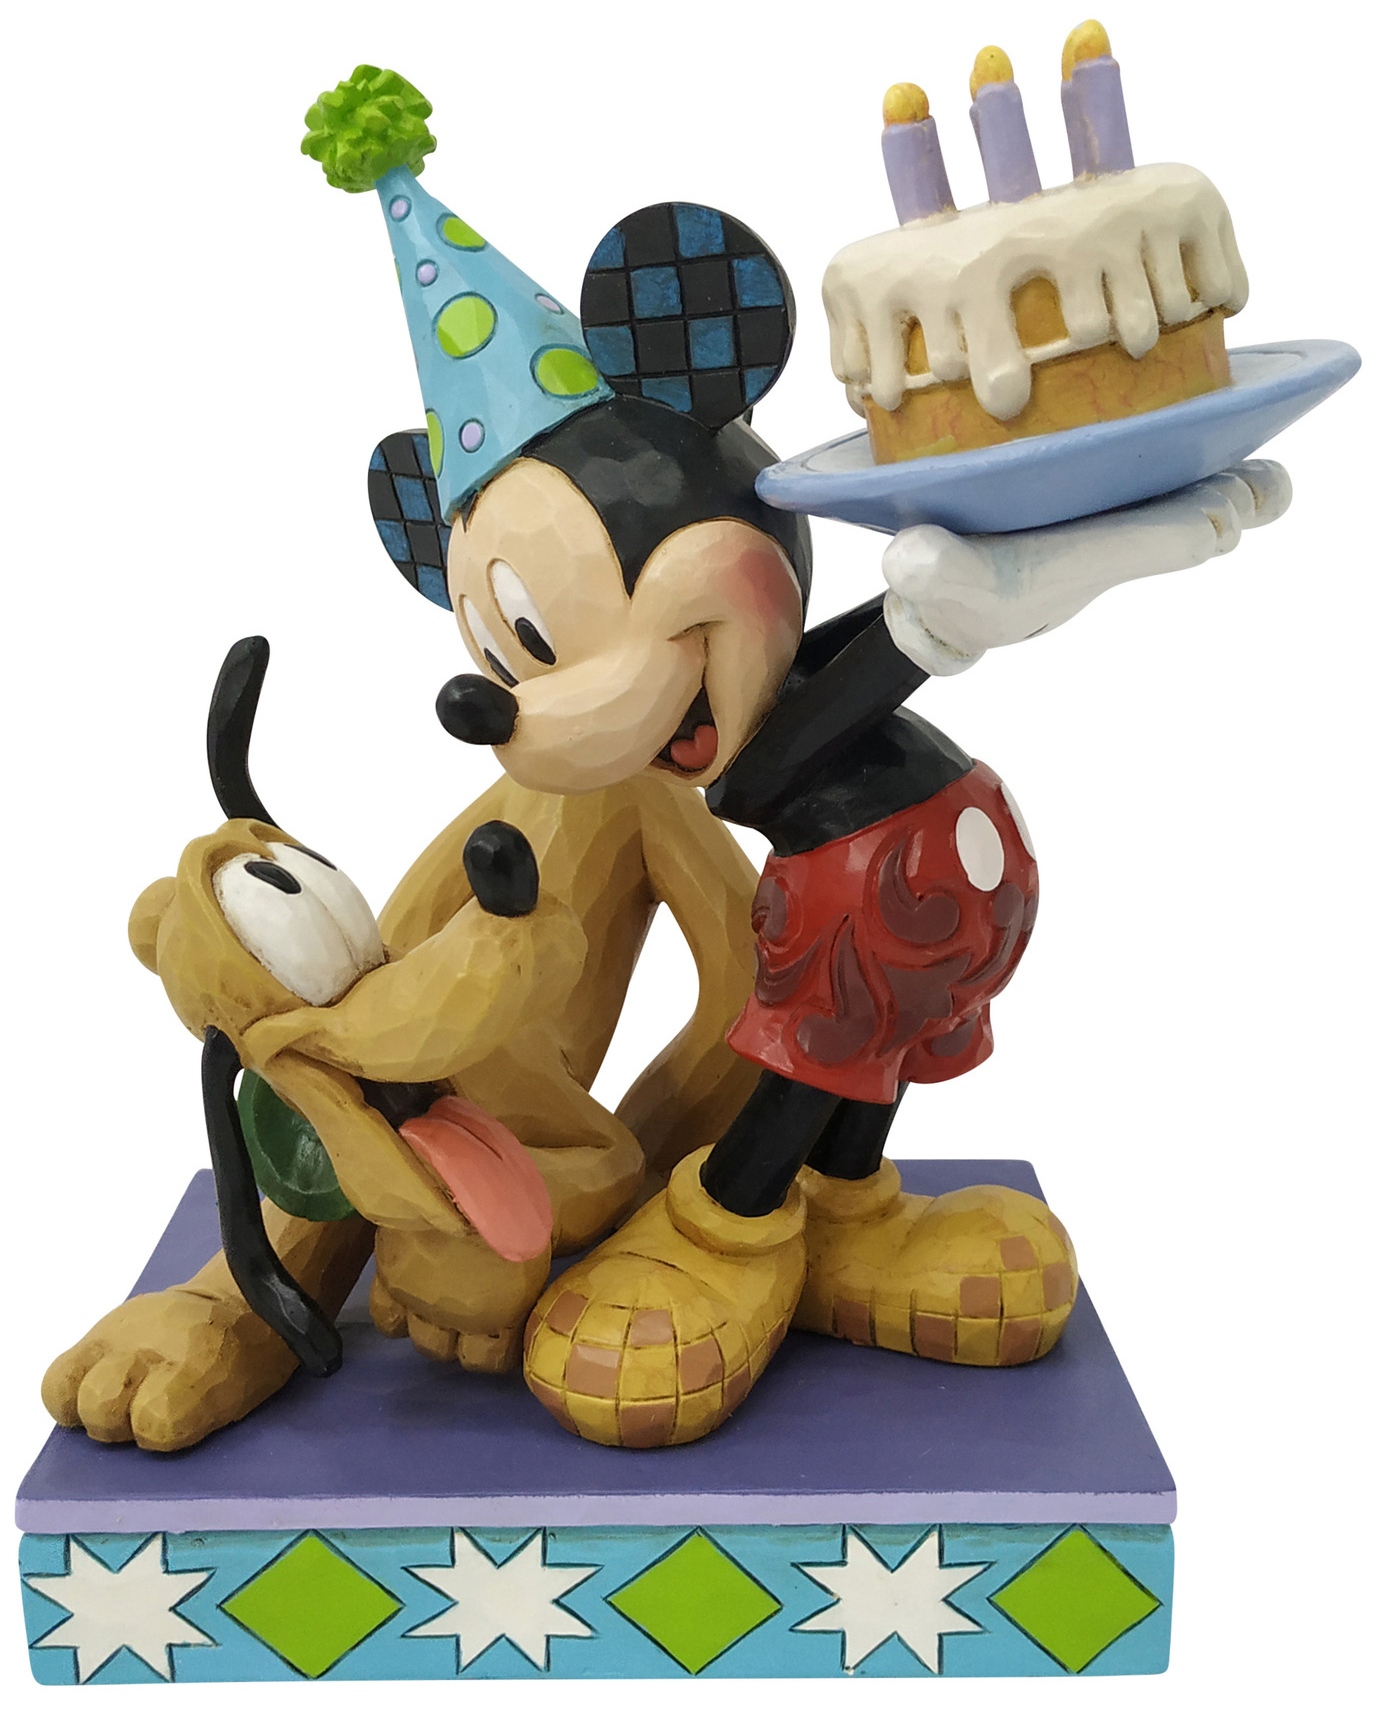 Disney Traditions by Jim Shore 6007058 Pluto Birthday with Mick Figurine